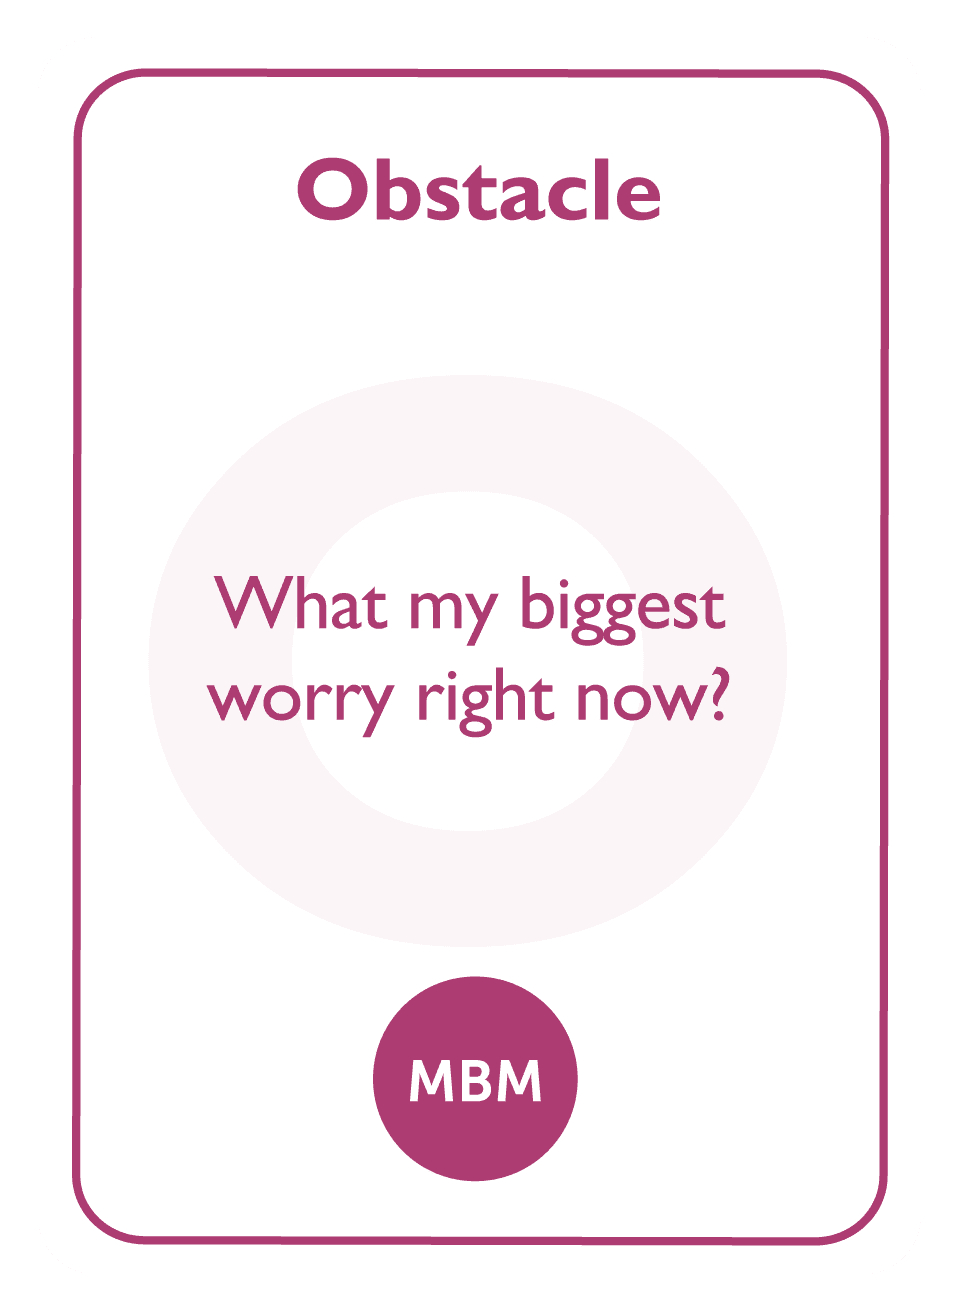 Coaching card titled Obstacle